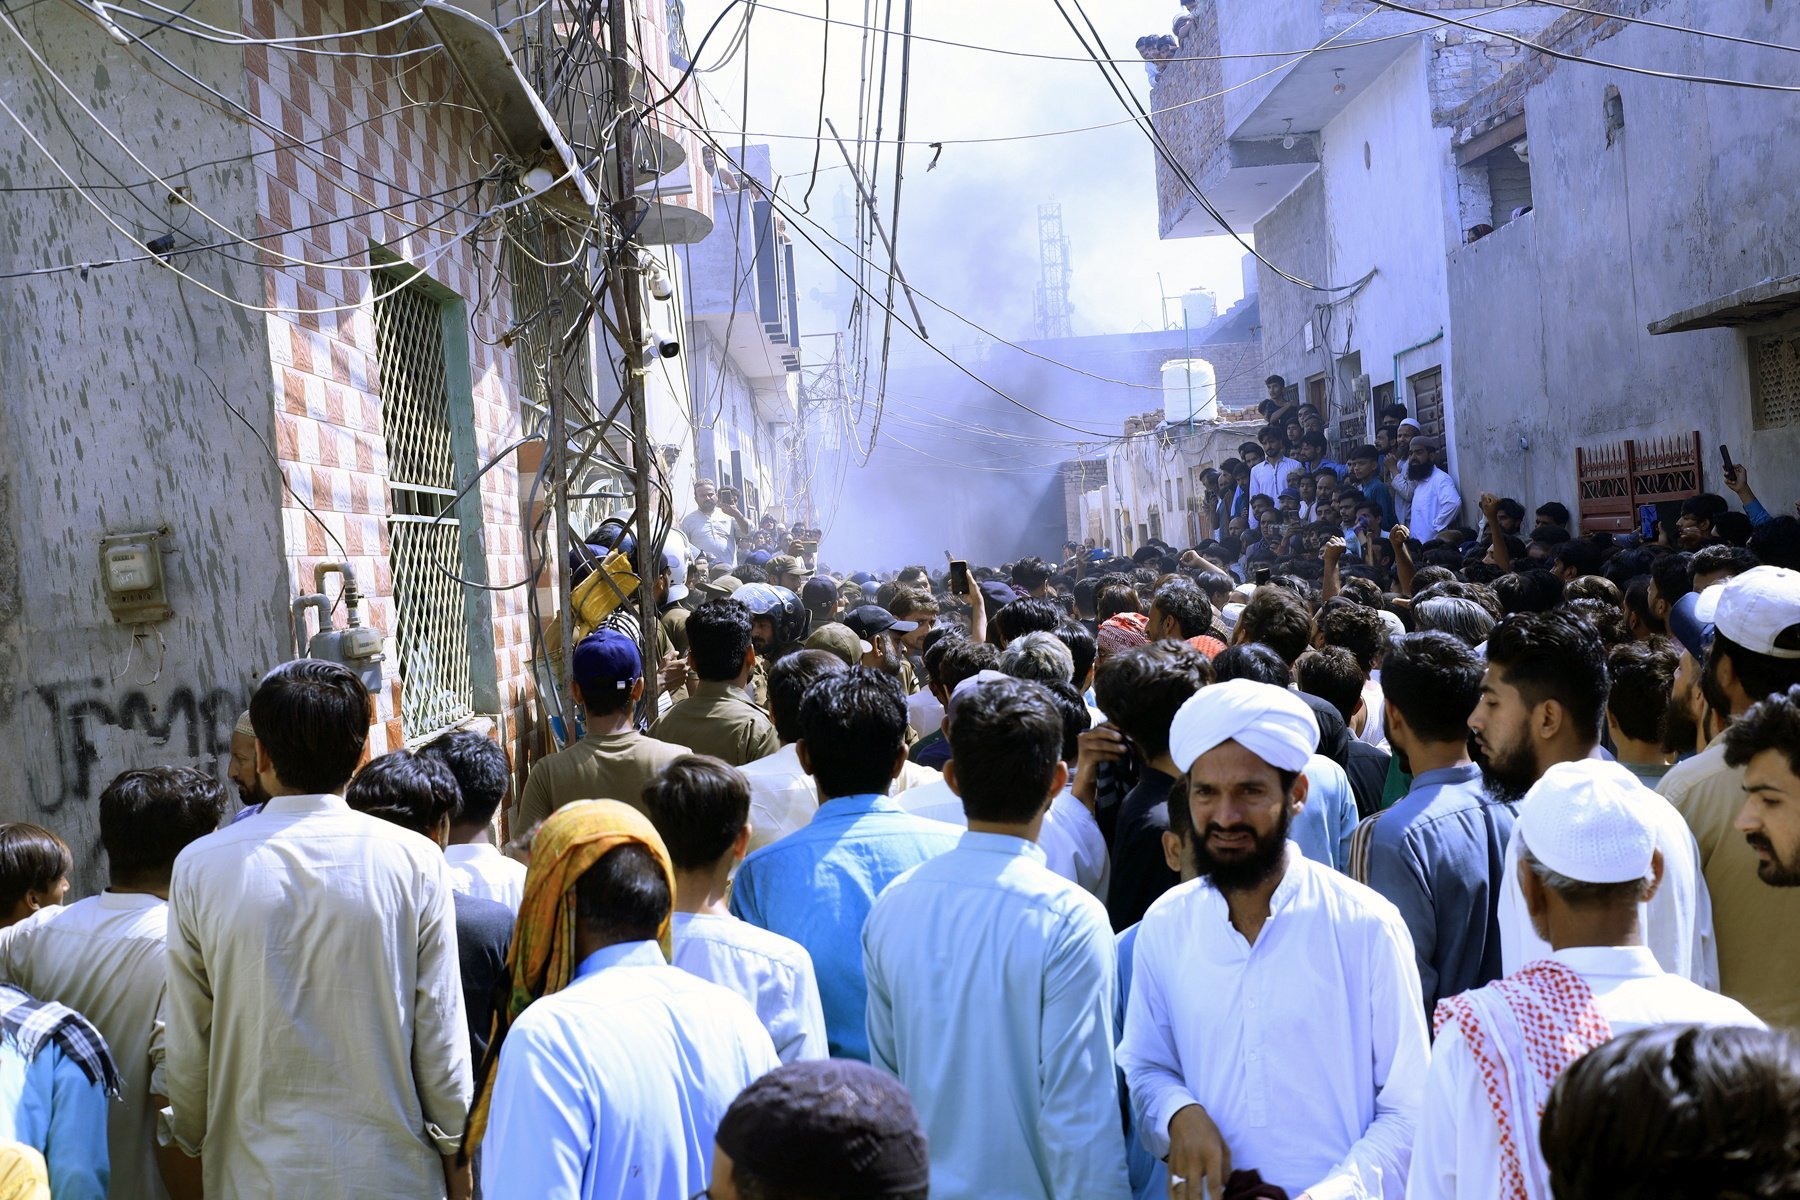 People gather at the scene after a violent mob attacked a Christian community over alleged blasphemy in Sargodha, Pakistan. Photo: EPA-EFE